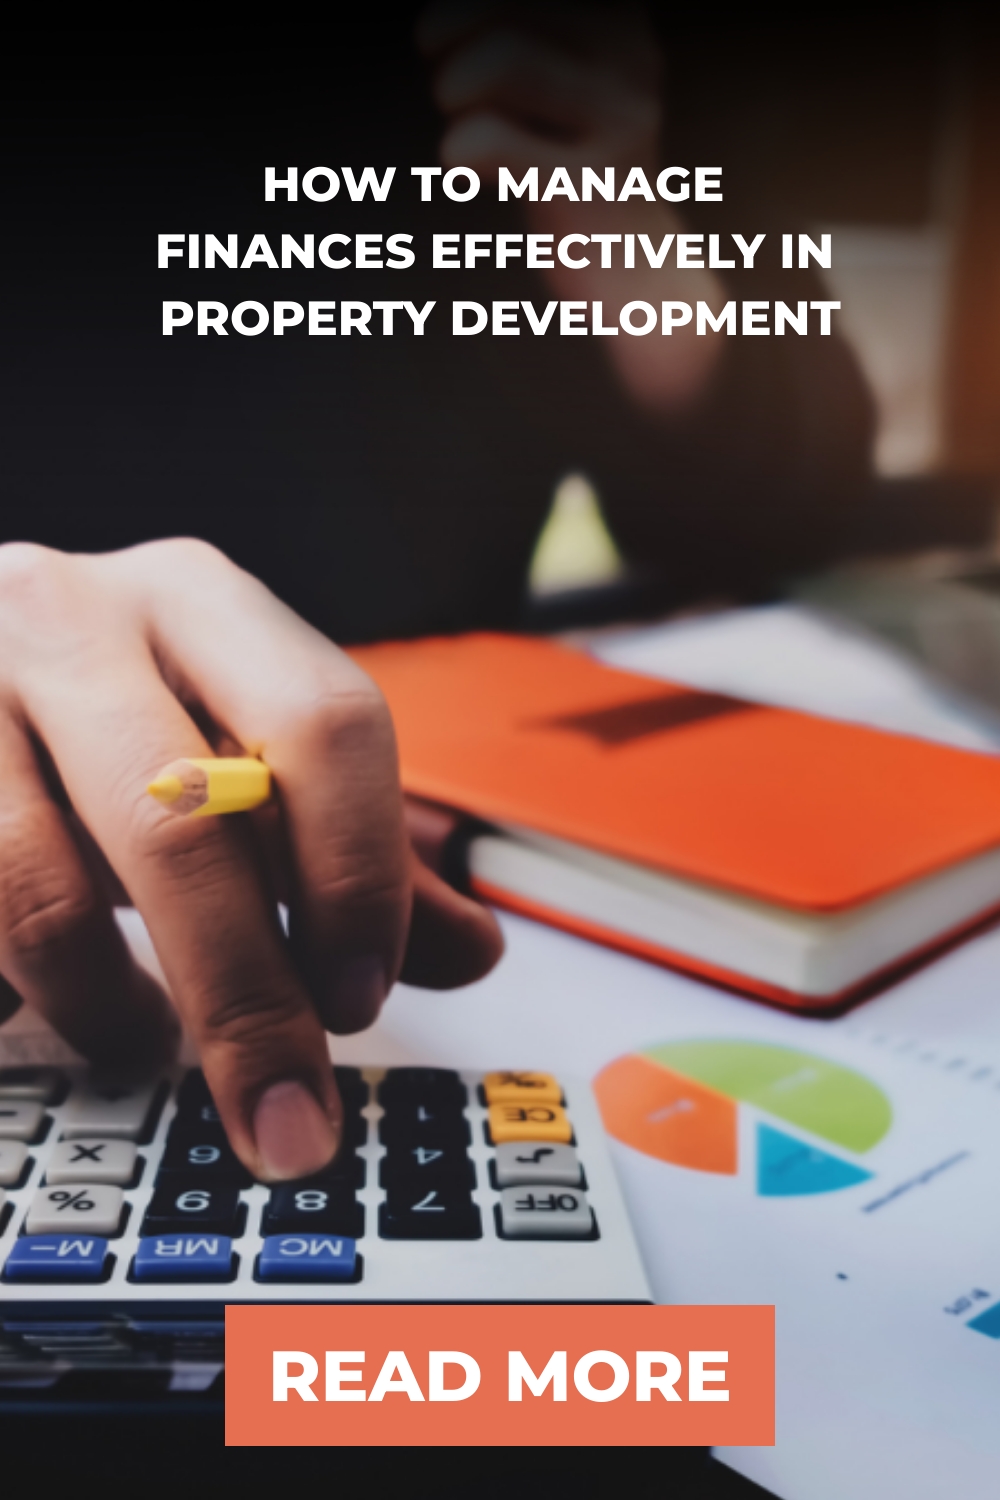 How to Manage Finances Effectively in Property Development